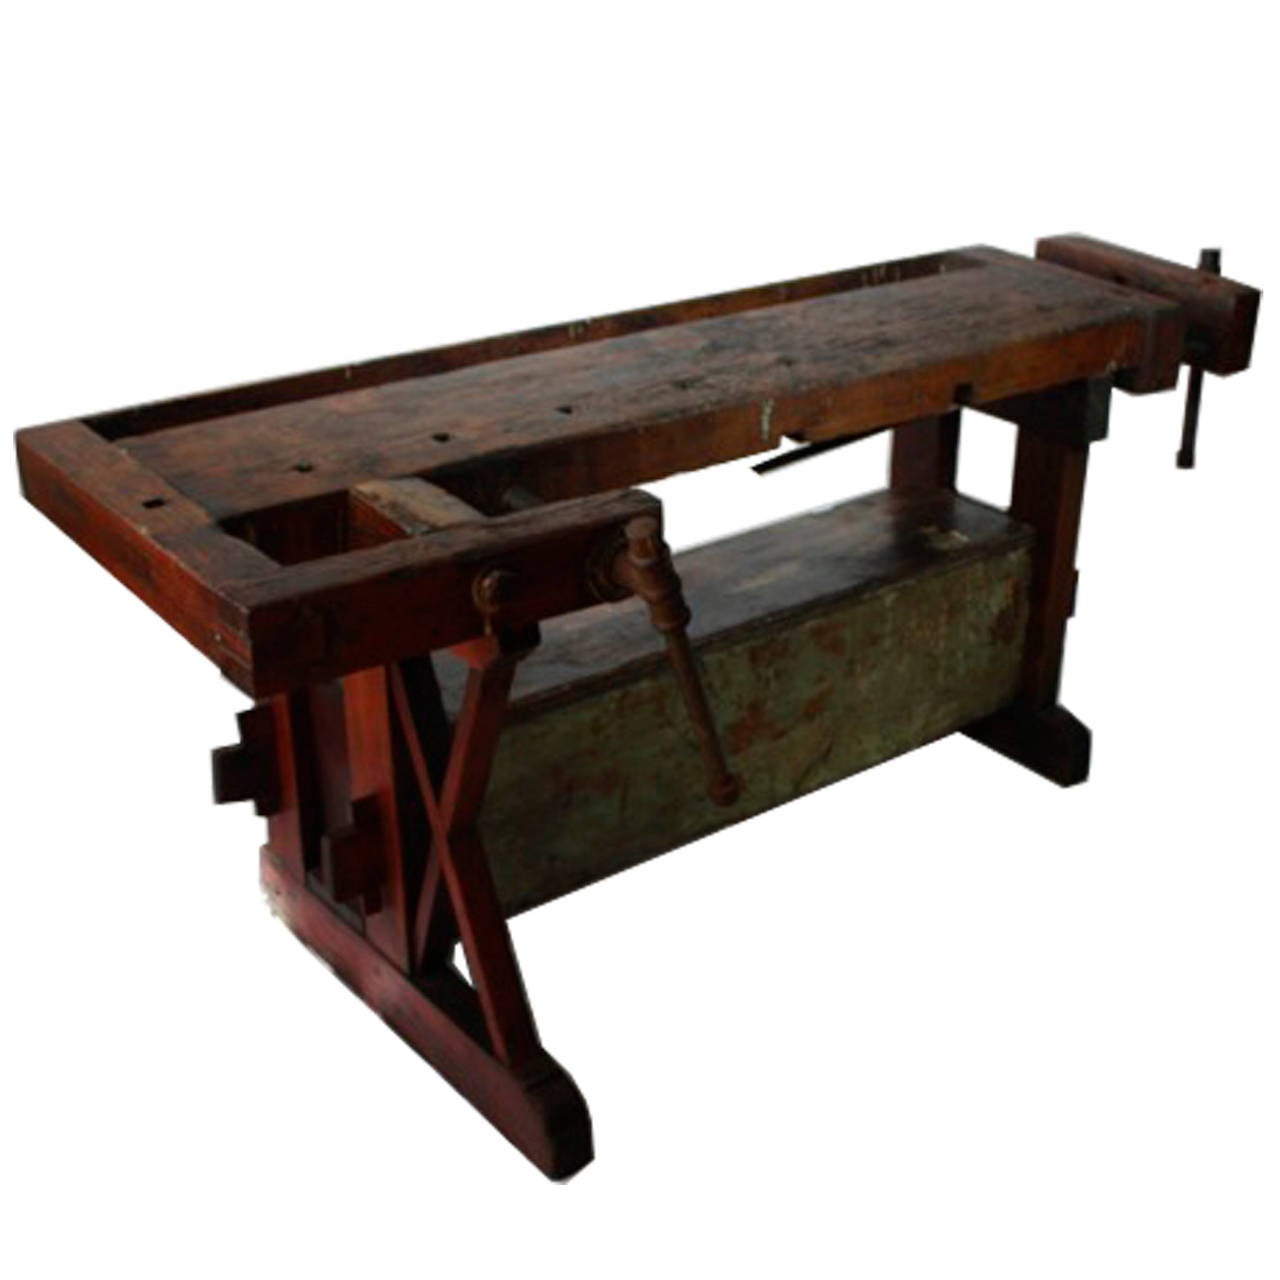 Rustic workbench with two working cast iron vices, built in toolbox and tool caddy running the length of the workbench. Made in Denmark, circa late 19th century.